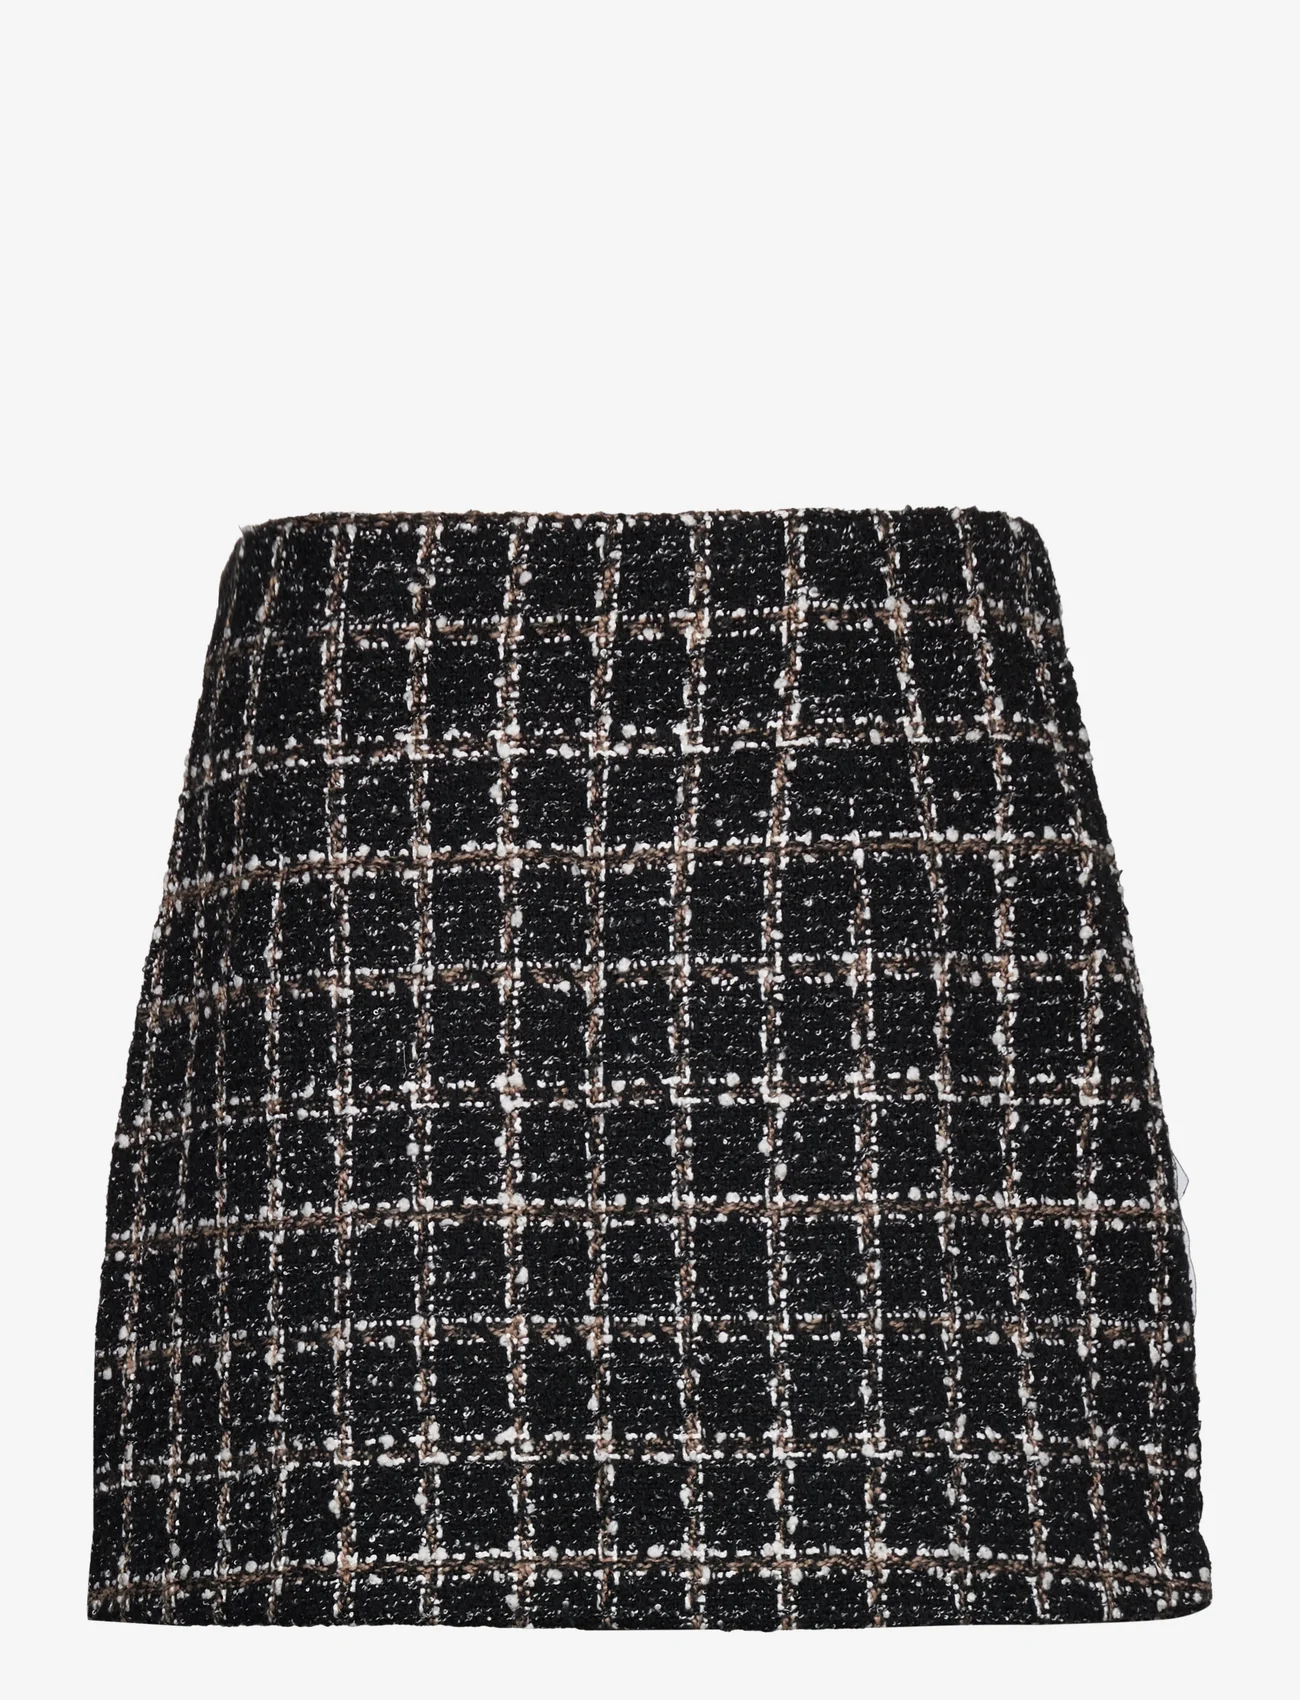 Abercrombie & Fitch - ANF WOMENS SKIRTS - korte nederdele - black and white tweed - 1